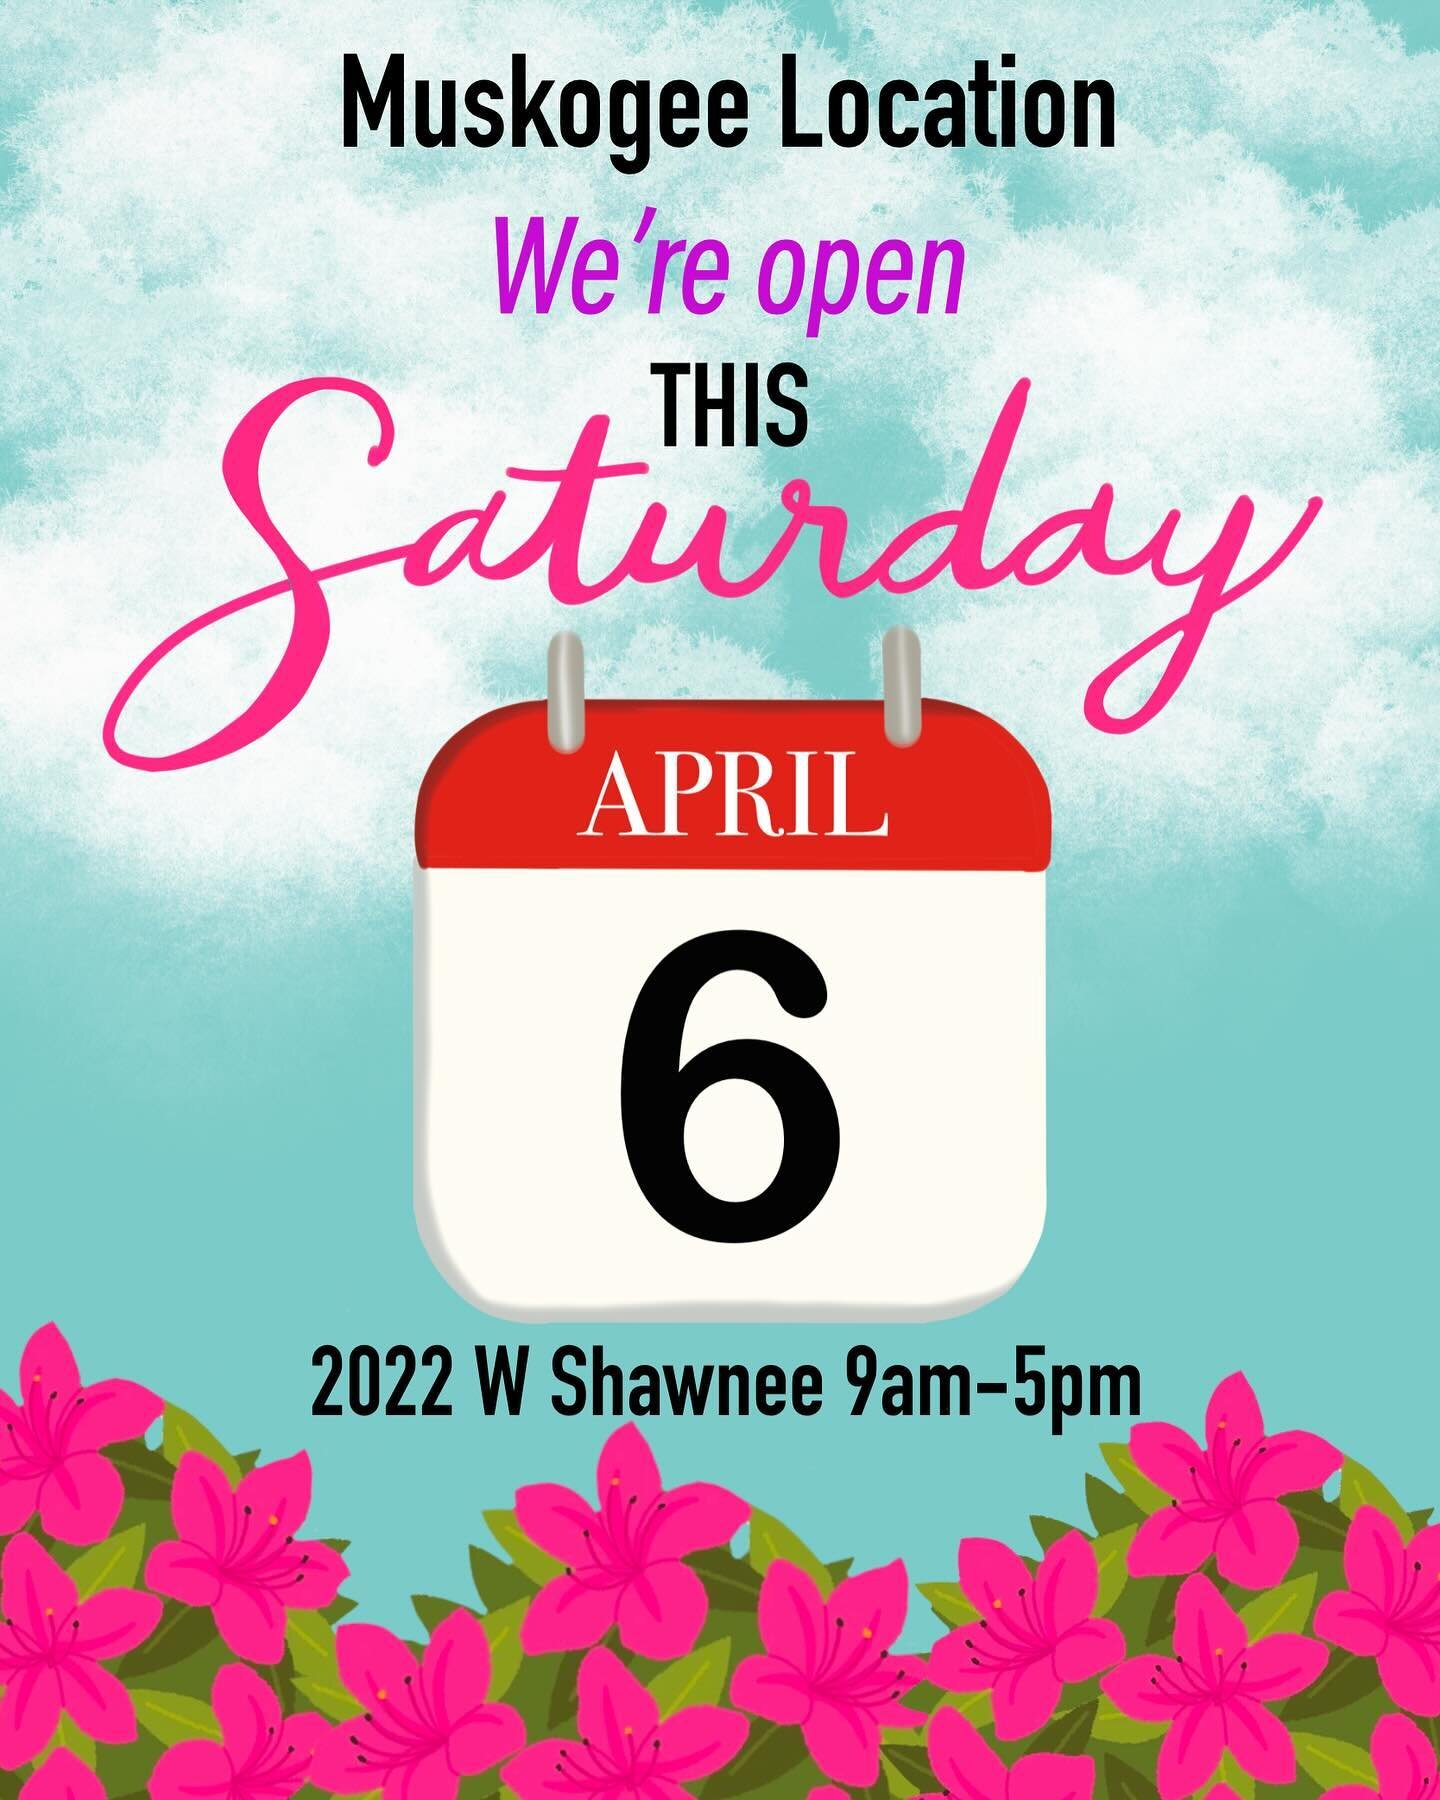 Tomorrow! Our Muskogee location will be open all day for the Azalea Festival. Stop by and shop! 
.
2022 W Shawnee 9-5pm